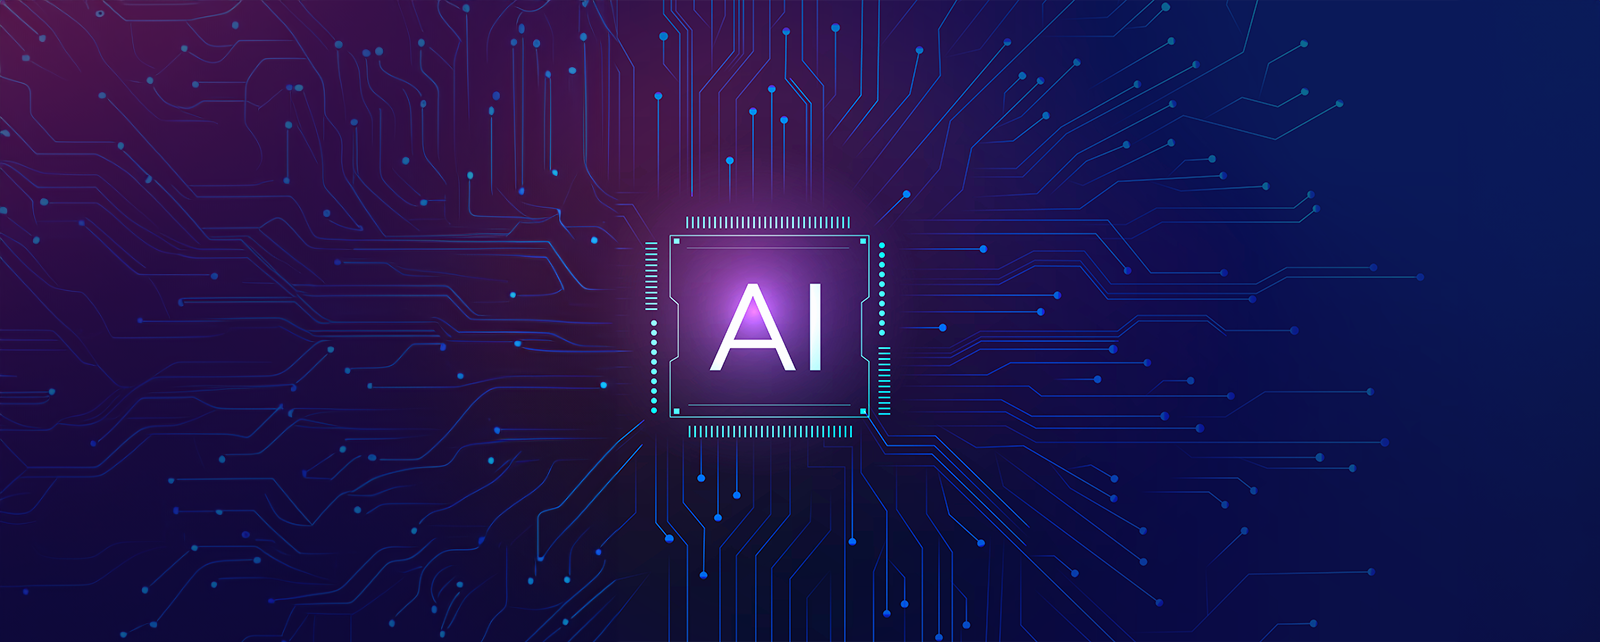 Guide to Artificial Intelligence in the Enterprise